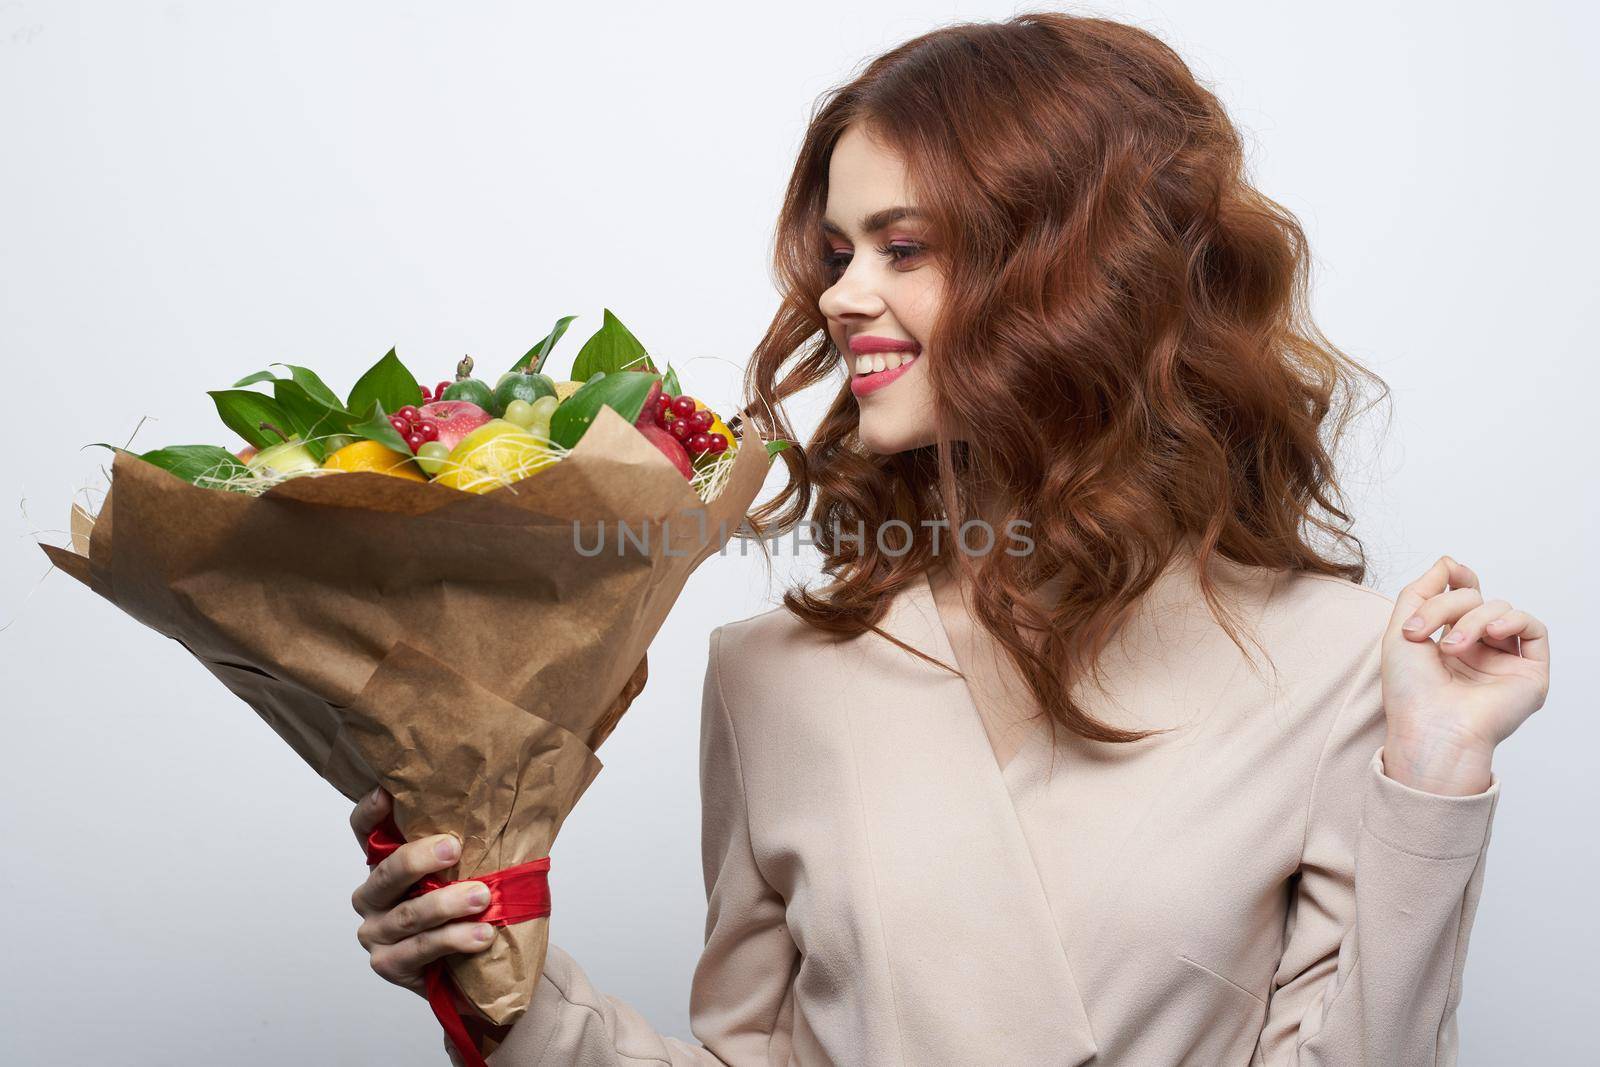 cheerful woman smile posing fresh fruits bouquet emotions light background. High quality photo